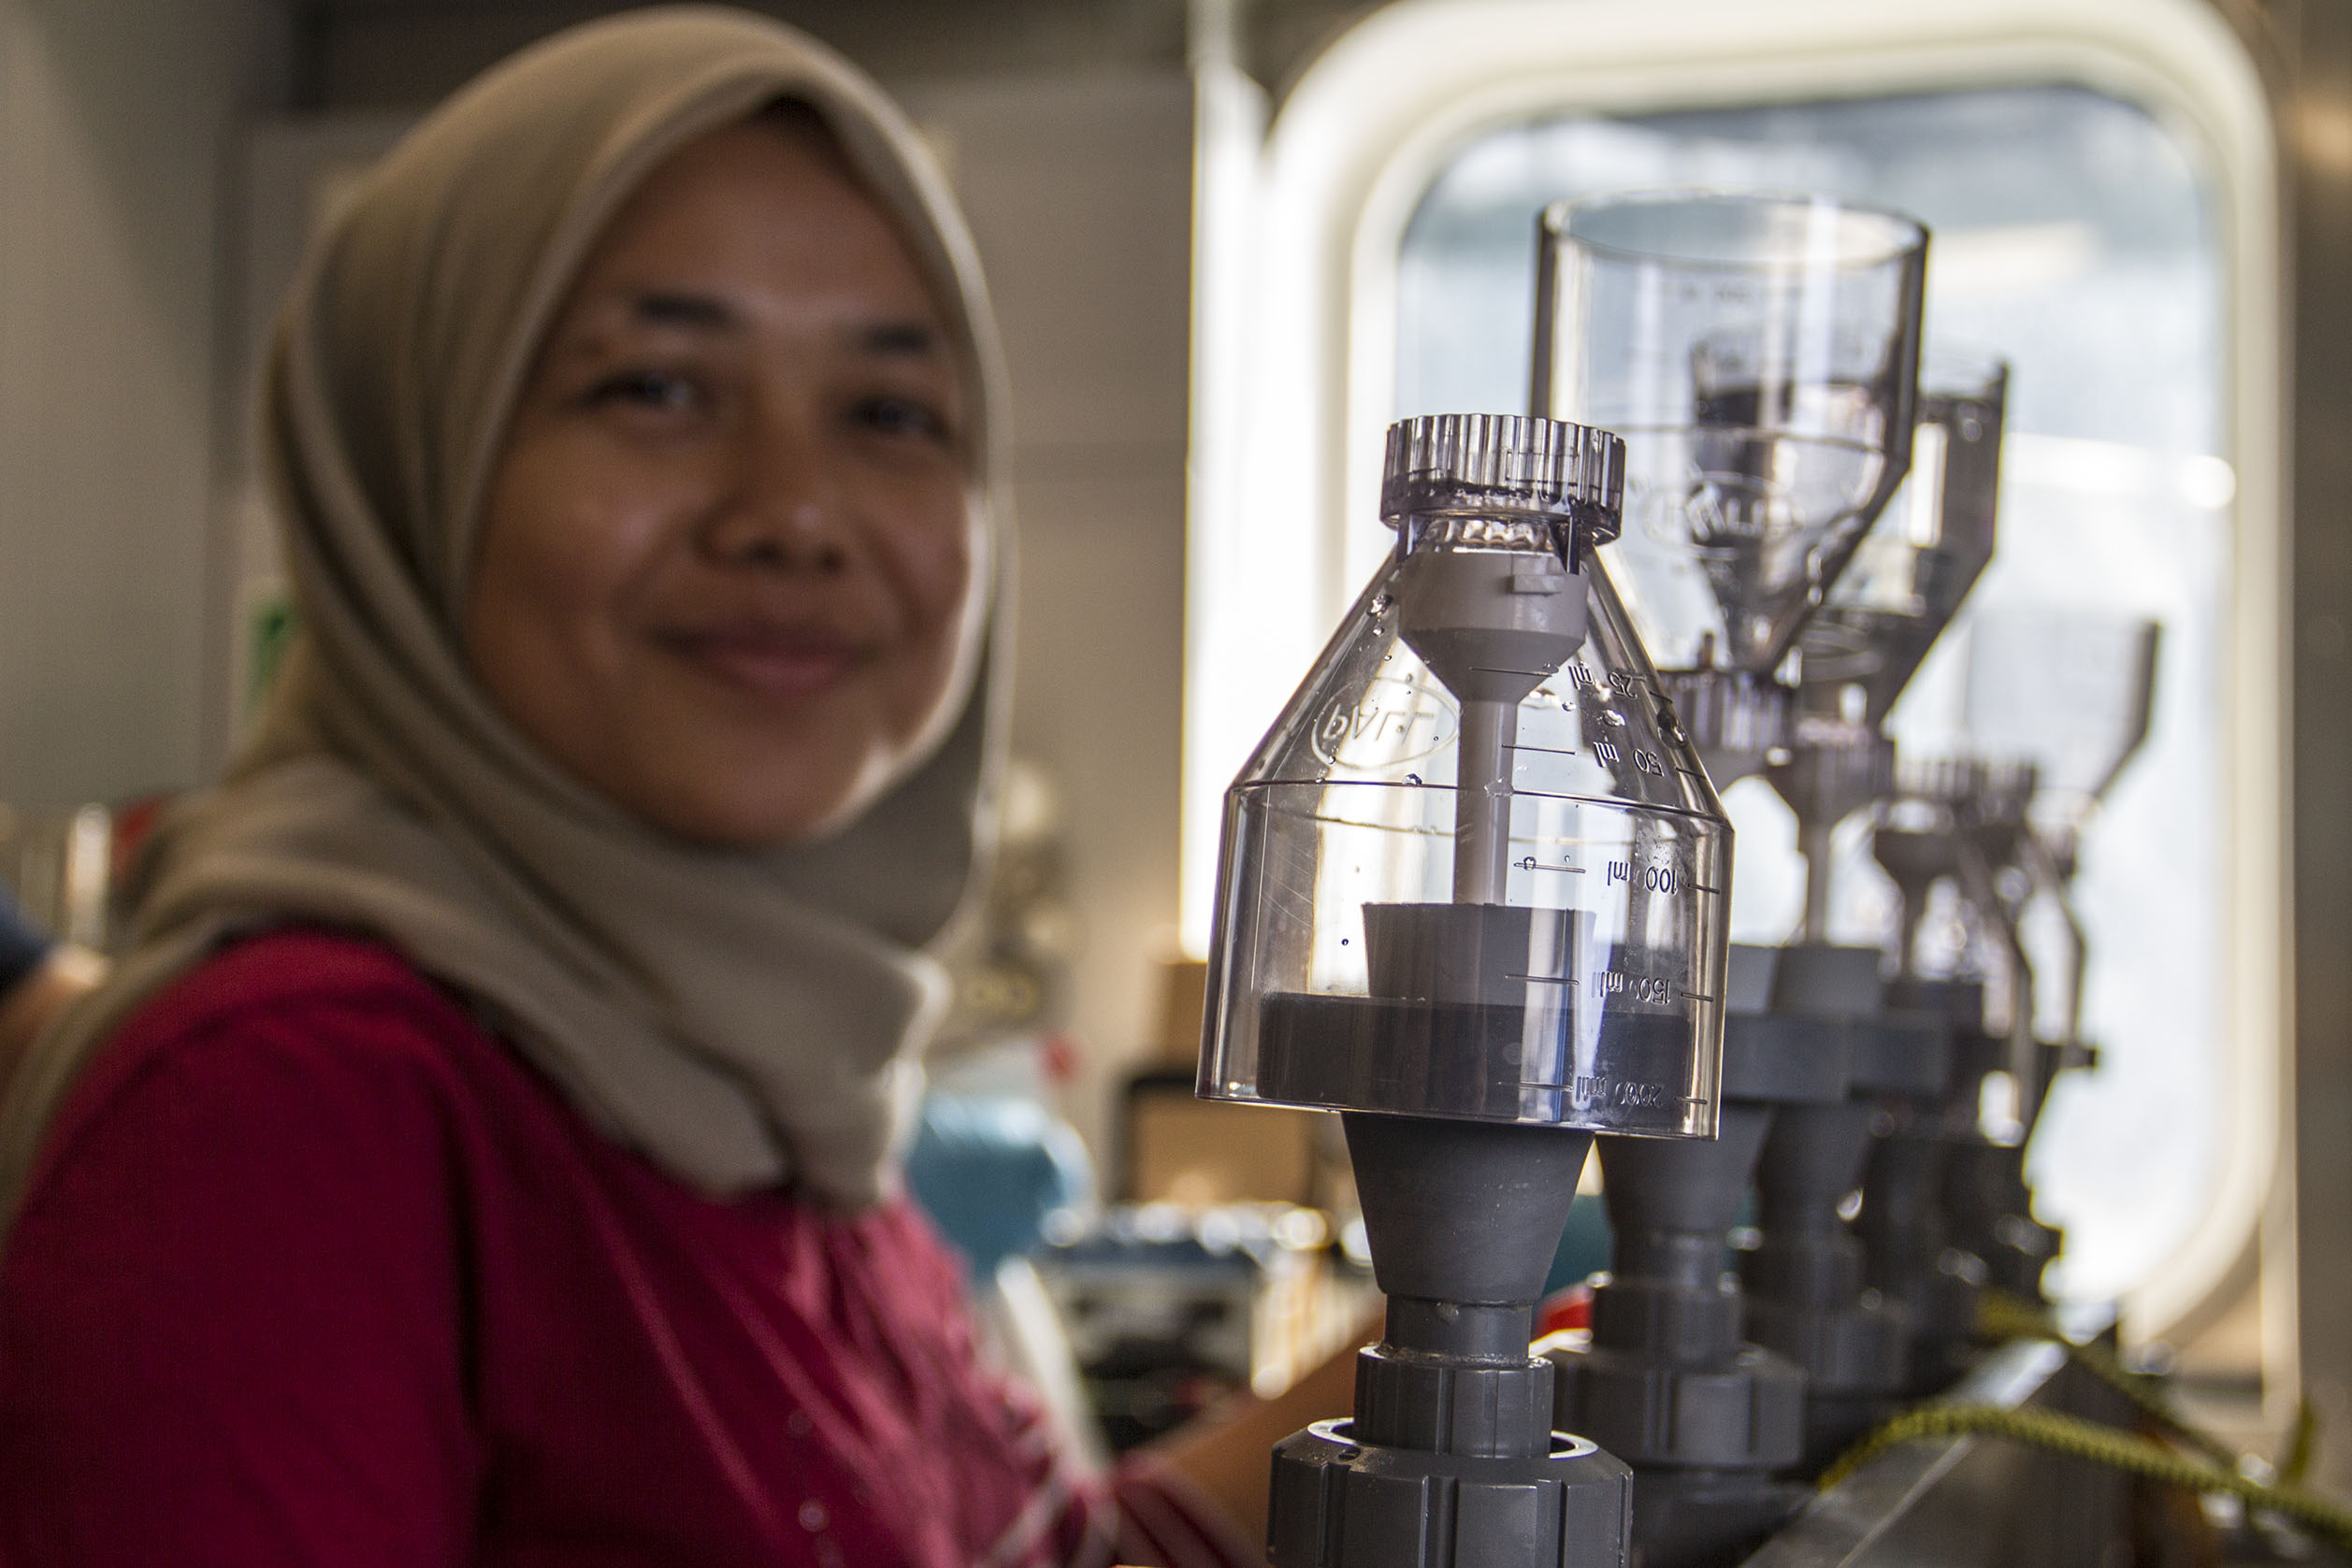 Nur Ili Hamizah Mustaffa applies high concentrations of salt to break the ionic interaction that attaches to cellular walls. This way she is able to effectively measure the amount of the enzyme in pho